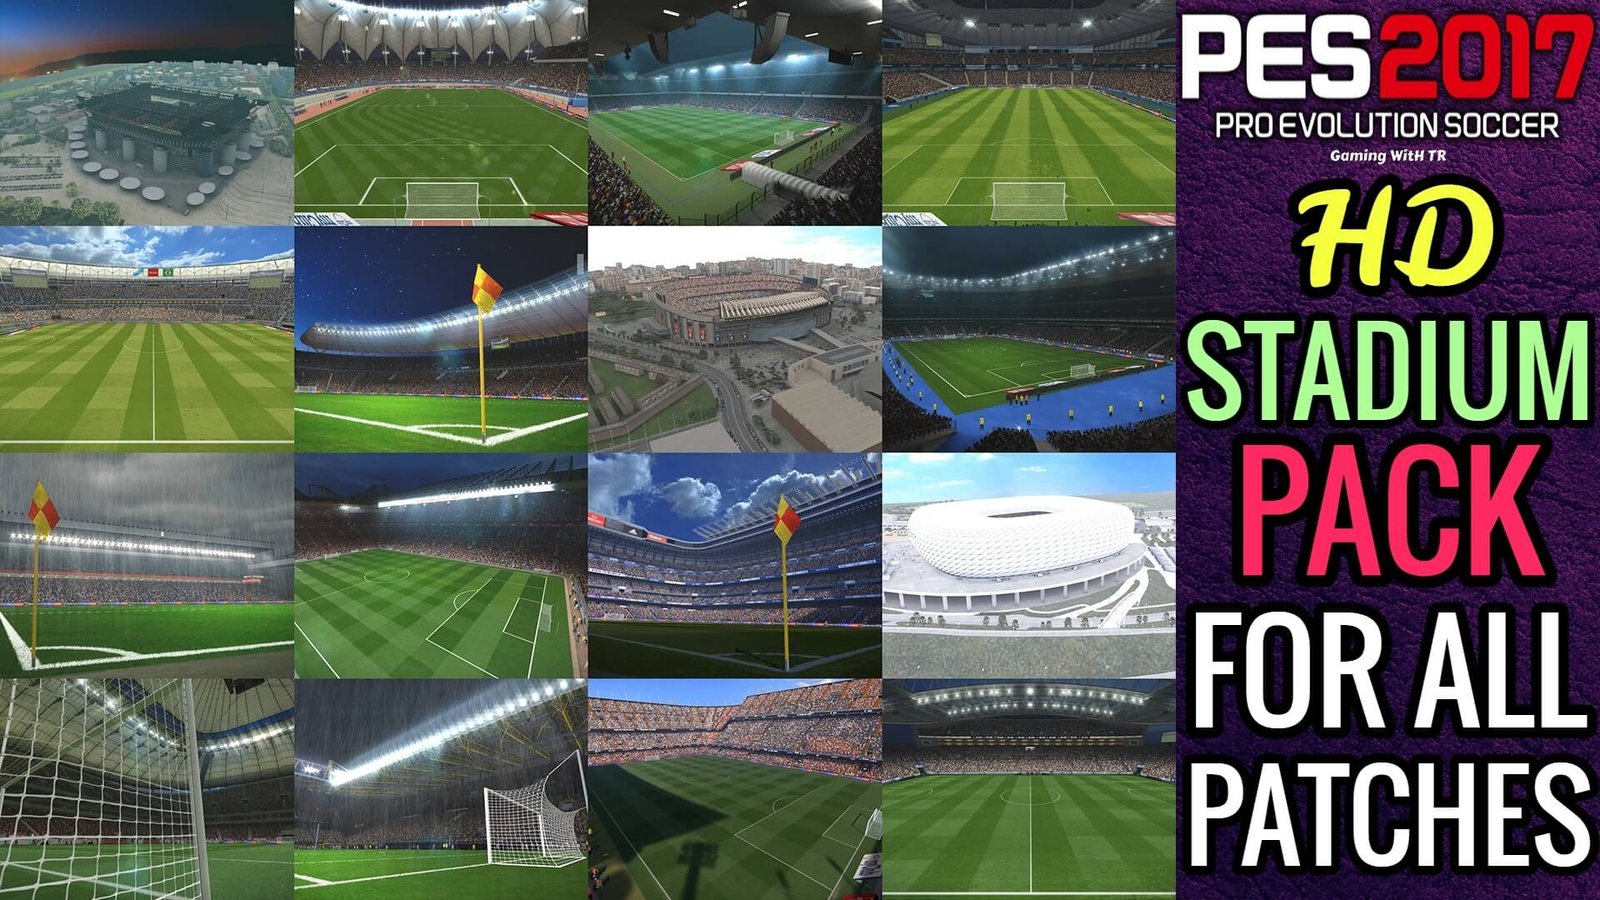 PES 2017 | HD STADIUM PACK FOR ALL PATCHES - PES 2017 Gaming WitH TR | Hình 4